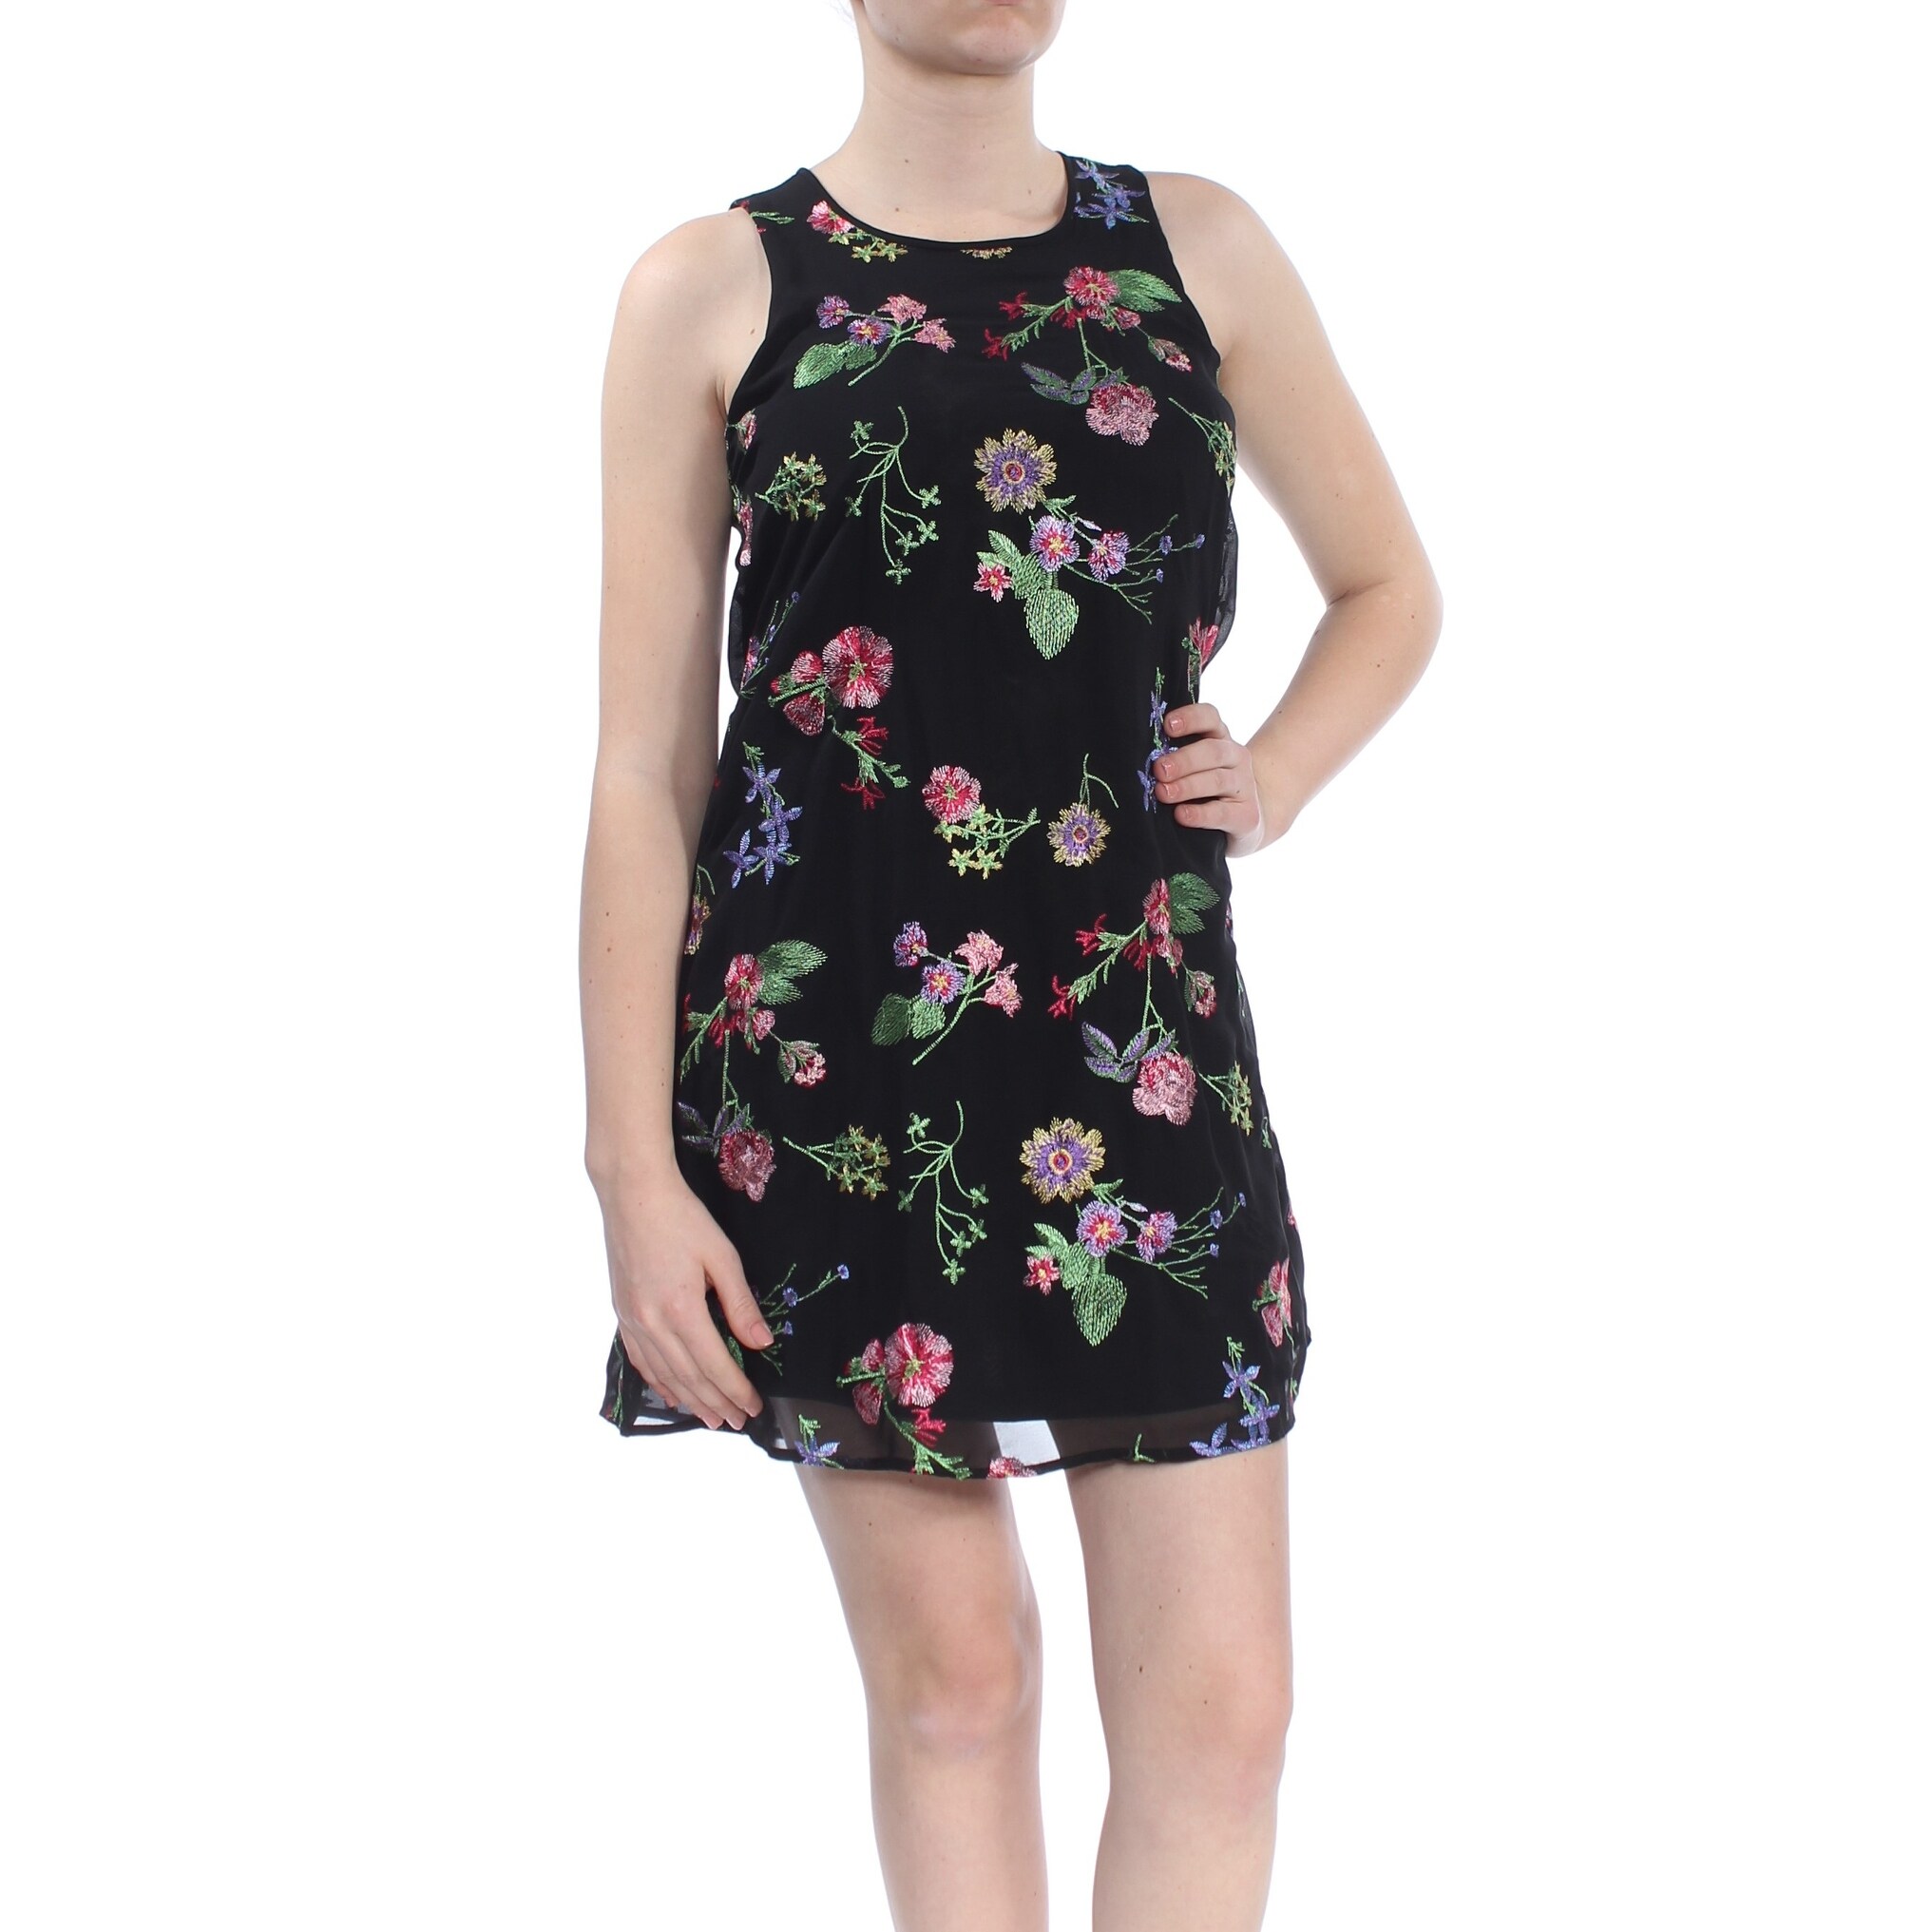 calvin klein black dress with embroidered flowers